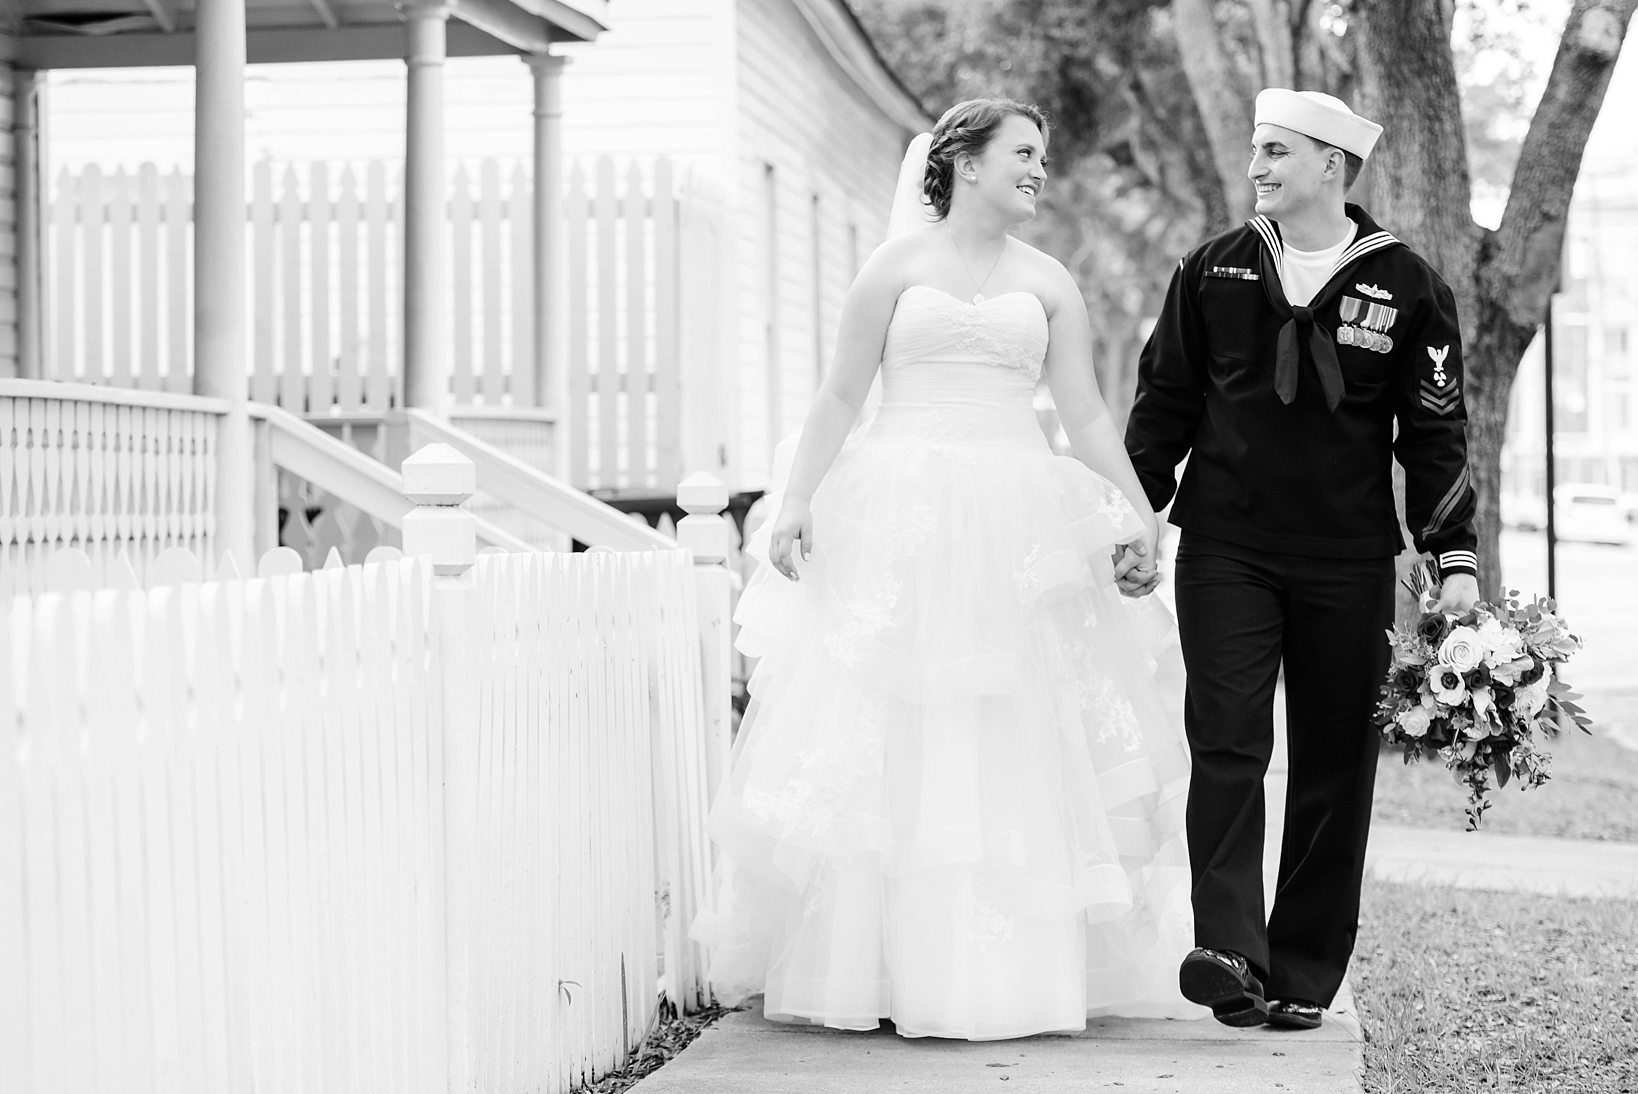 Classic black and white image of a bride and groom walking along a sidewalk next to a picket fence